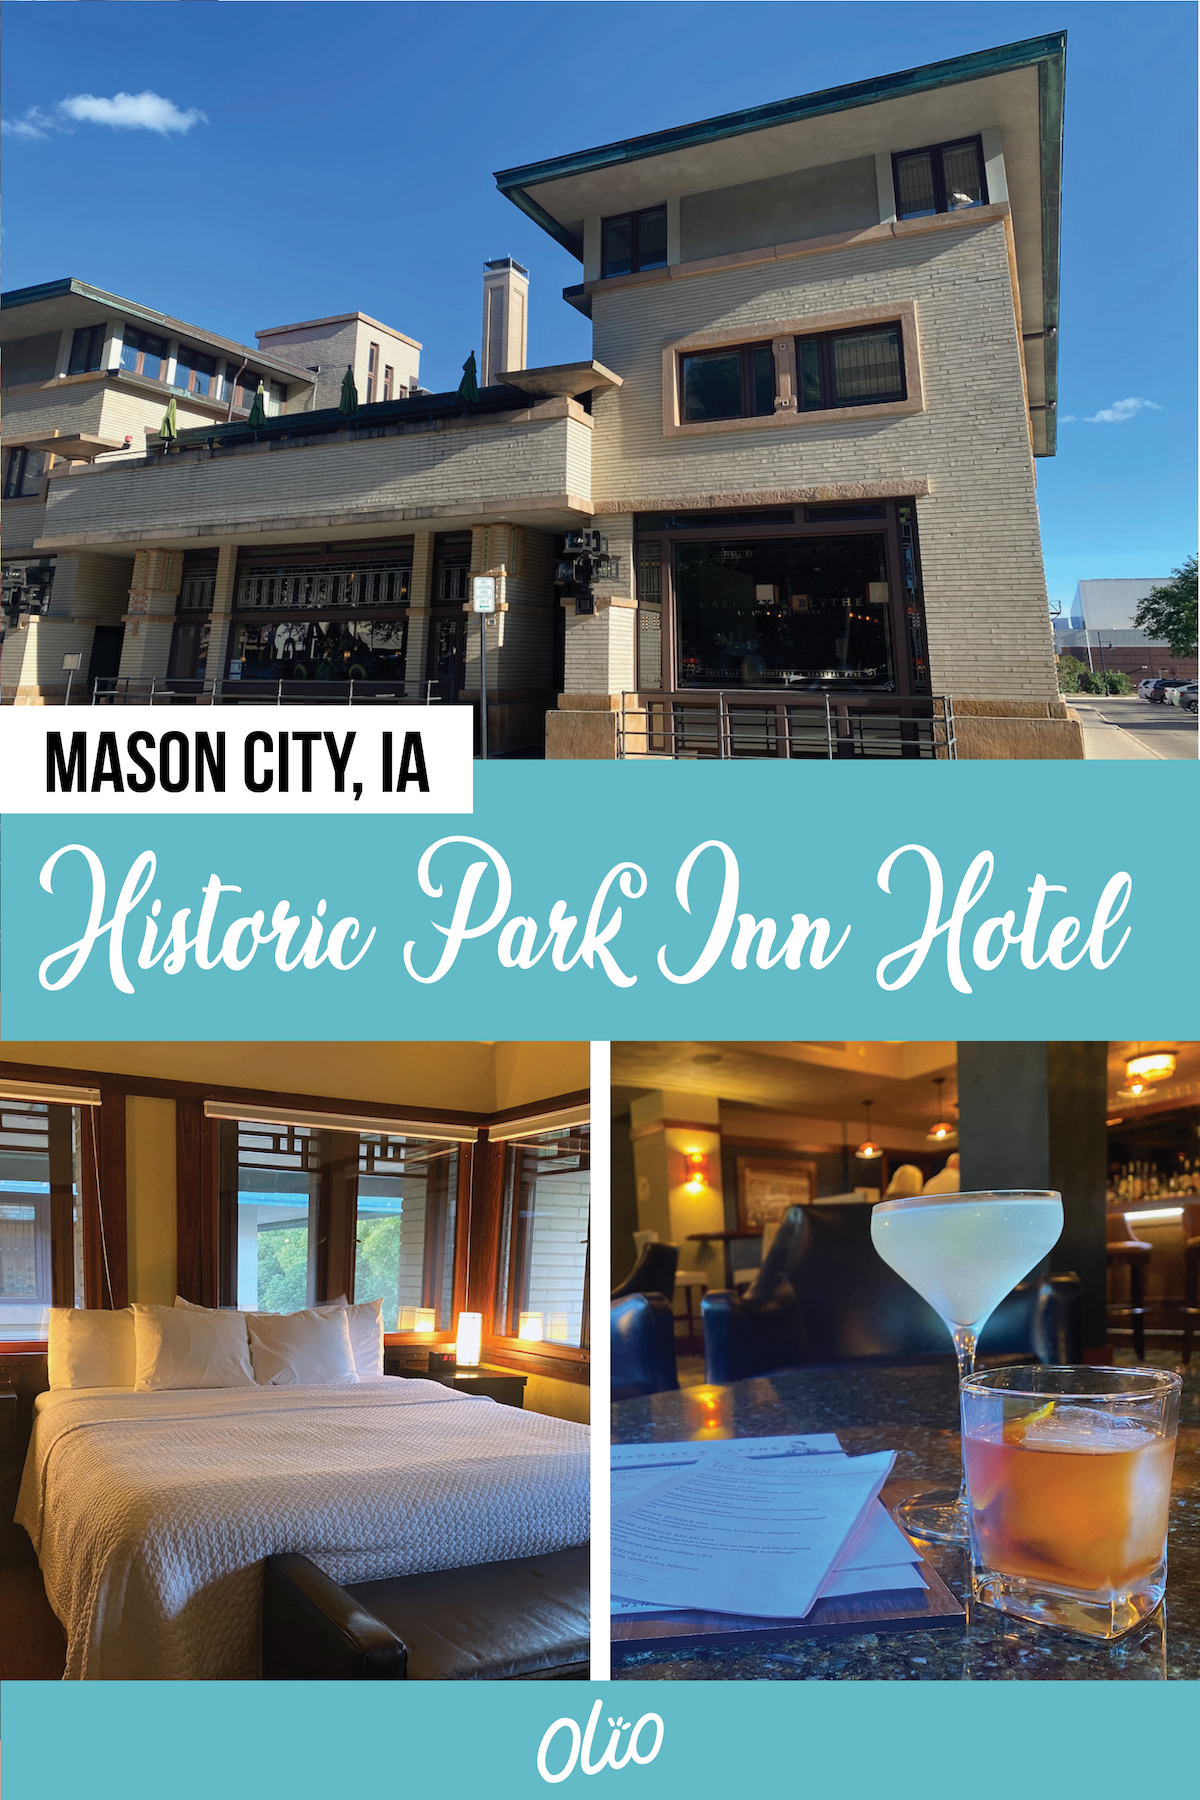 Did you know that Mason City, Iowa is home to the only remaining Frank Lloyd Wright hotel in the world? Discover why you need to plan your stay at the Historic Park Inn Hotel and experience this Prairie style architectural gem for yourself. #Iowa #MasonCityIA #FrankLloydWright #BoutiqueHotel